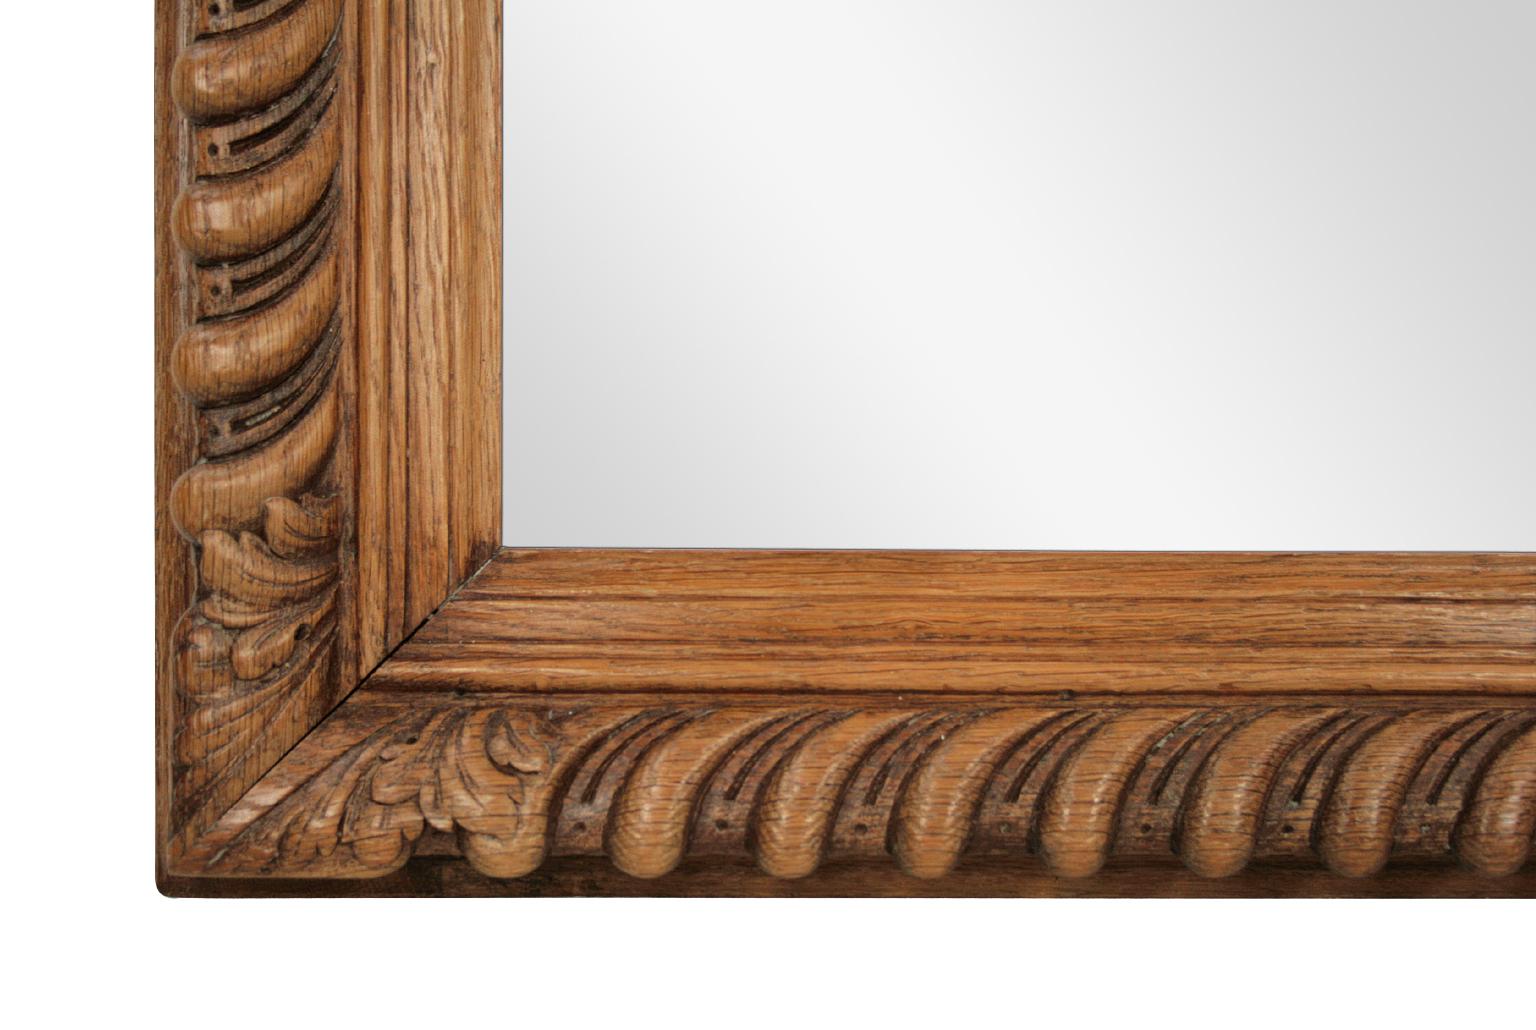 Hand-Carved French Antique Mirror, Carved Oak Wood, 19th Century